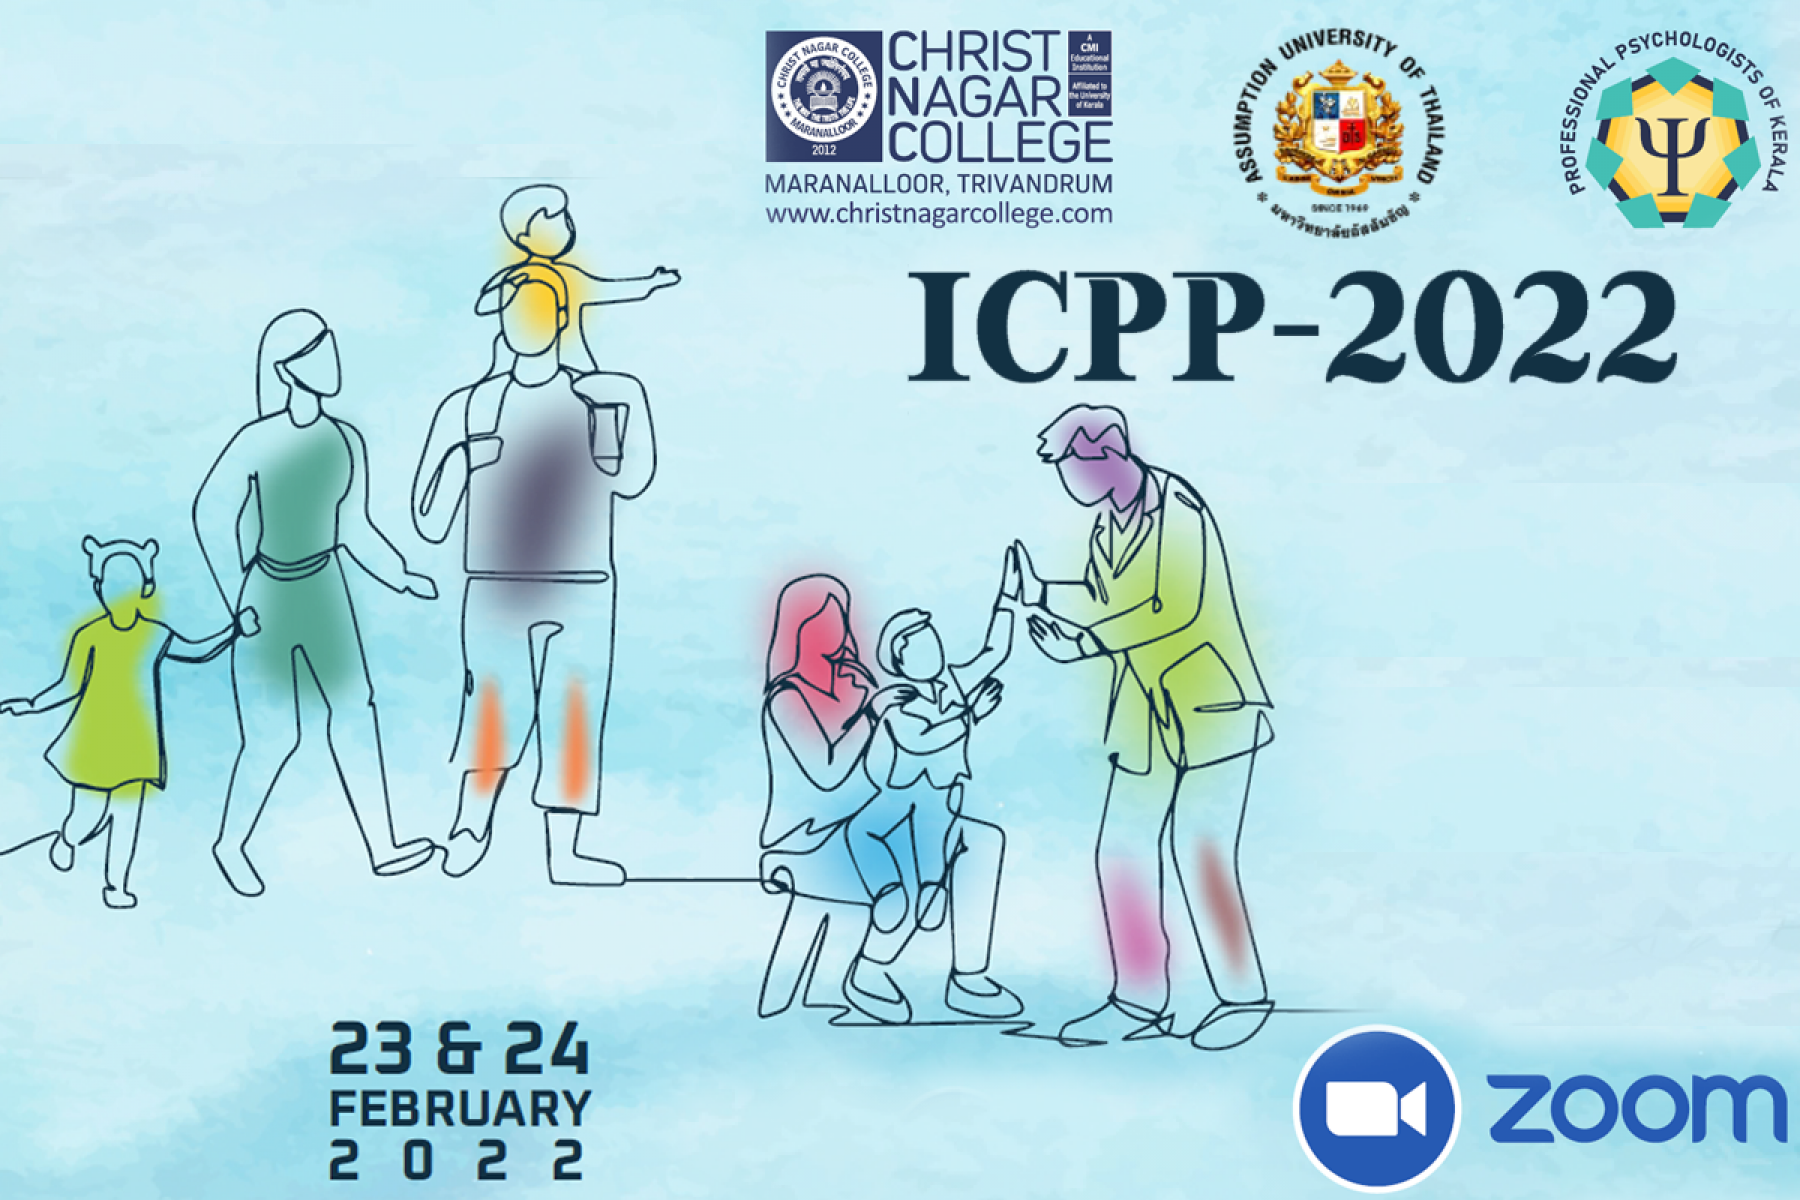 International Conference on Positive Parenting (ICPP-2022)